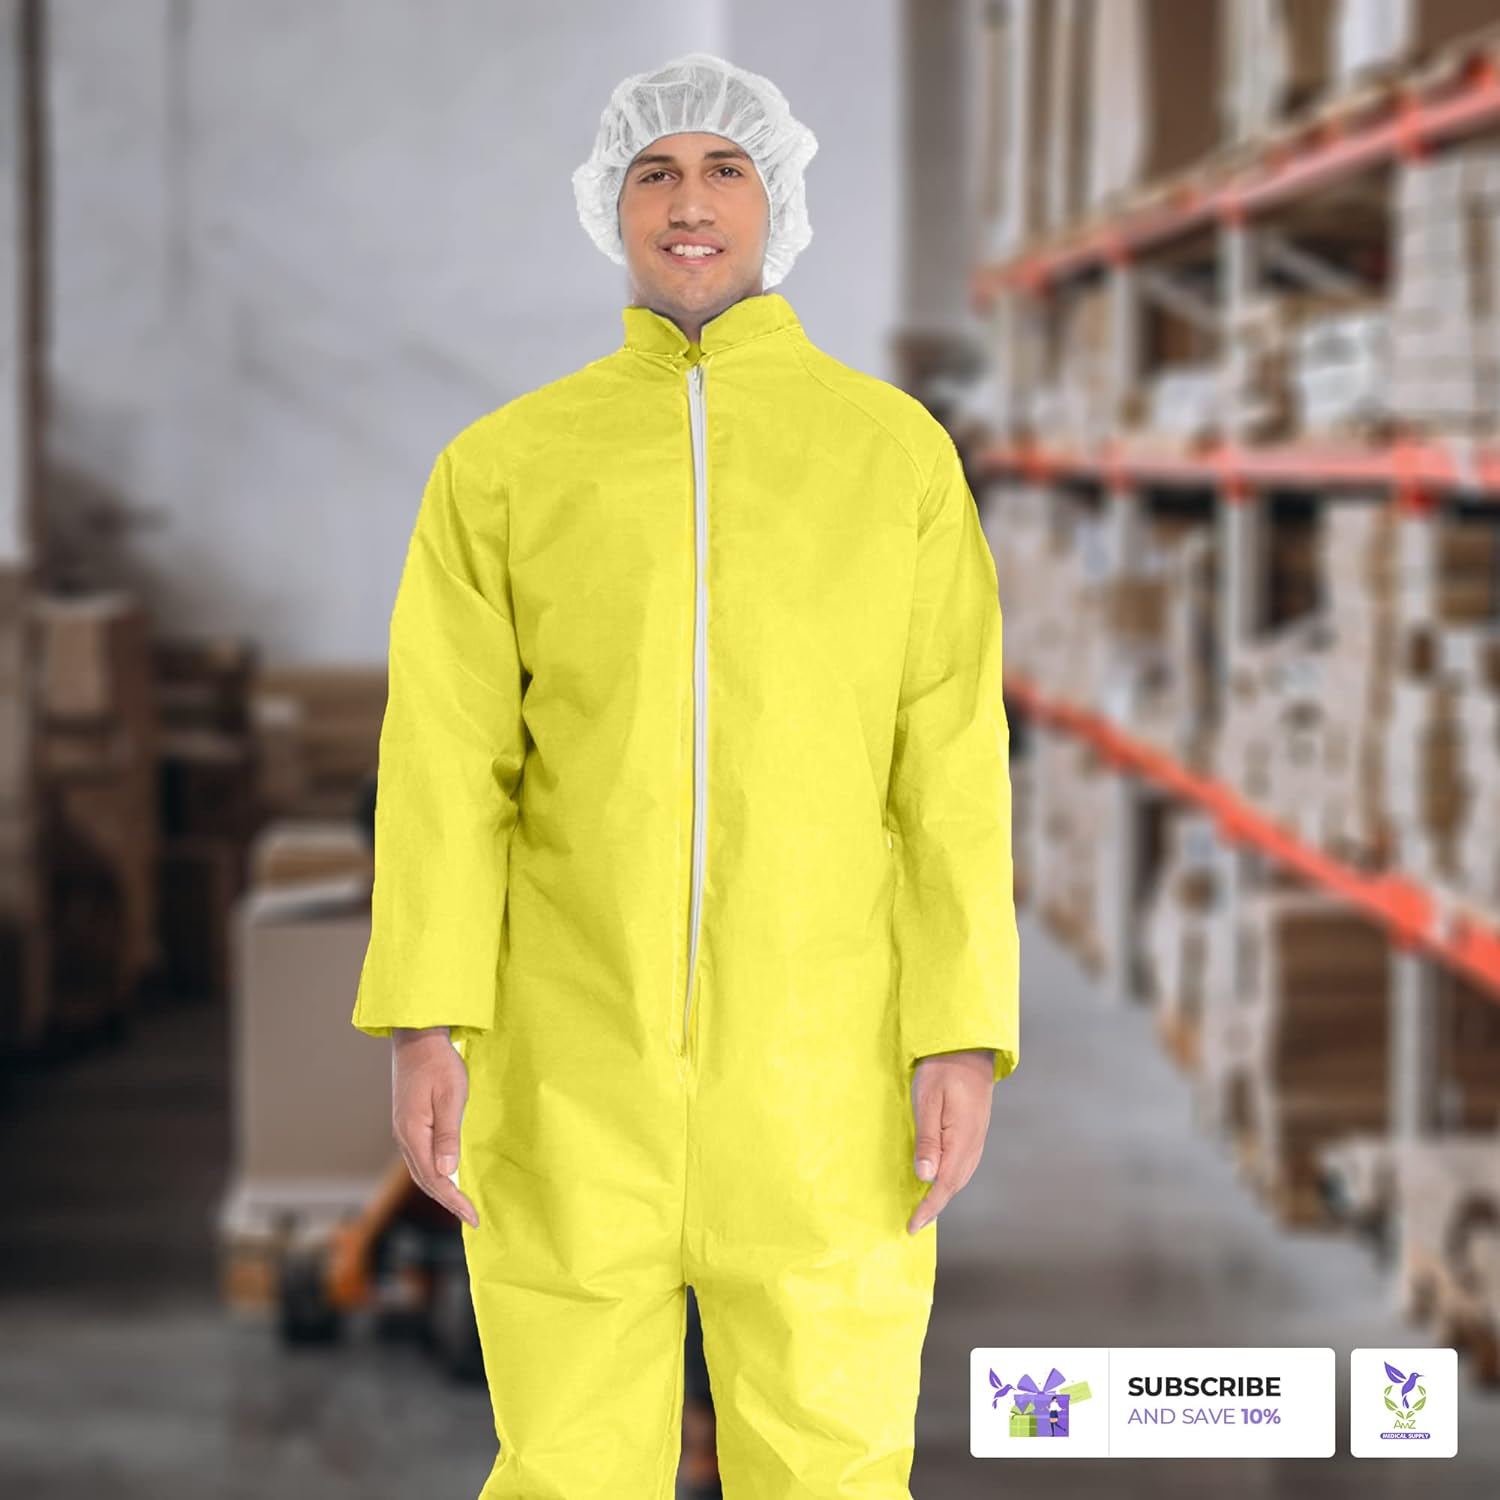 AMZ Medical Supply Disposable Hazmat Suit Medium. Pack of 5 Yellow Coveralls for Men and Women, 82 gsm Polyethylene Polypropylene Protective Suit